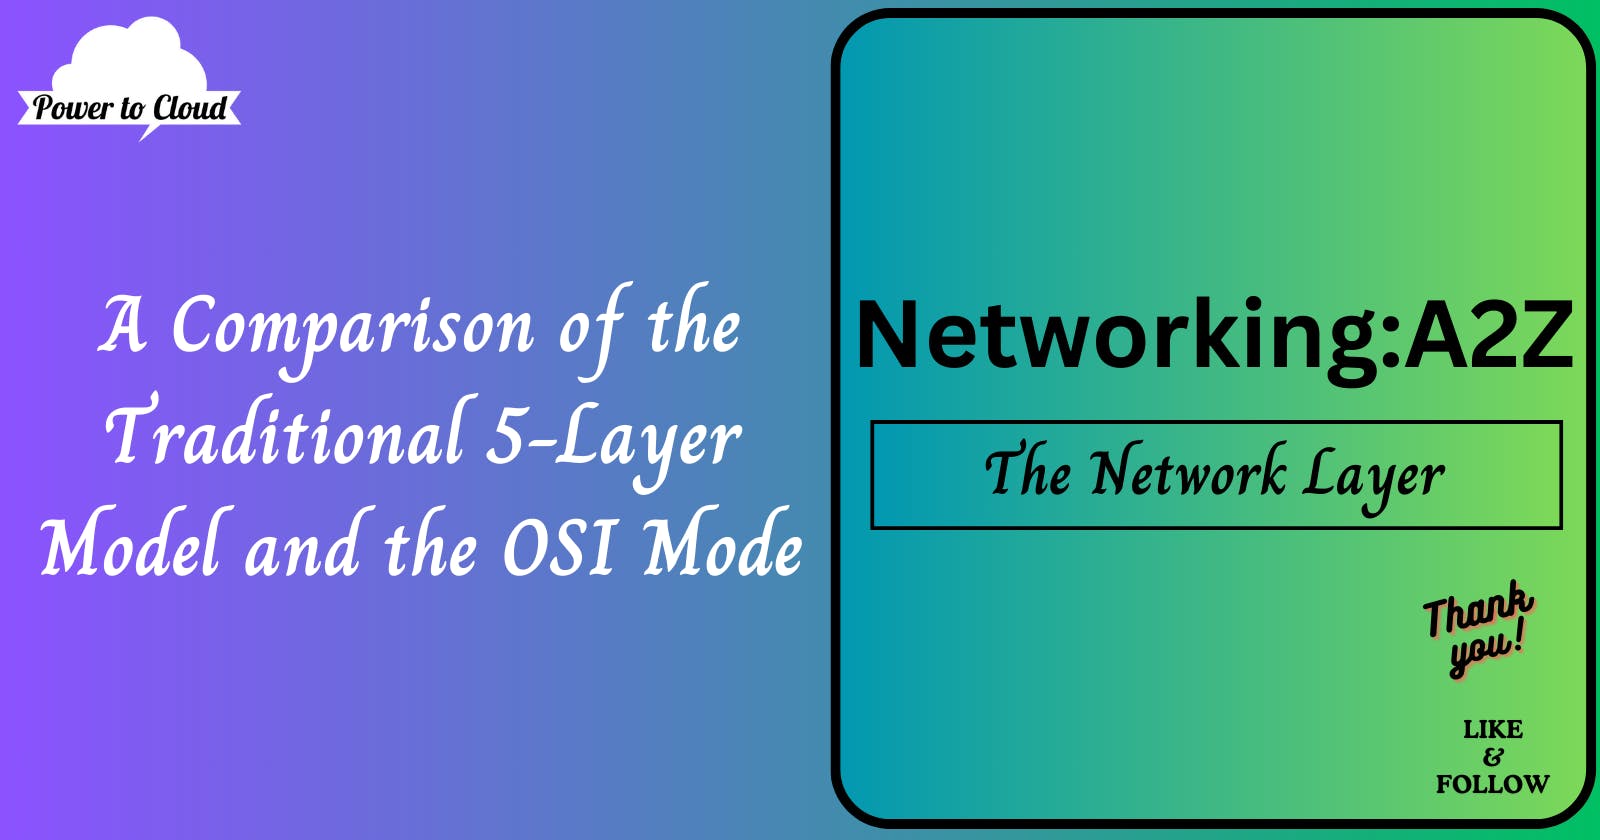 2.1 A Comparison of the Traditional 5-Layer Model and the OSI Mode